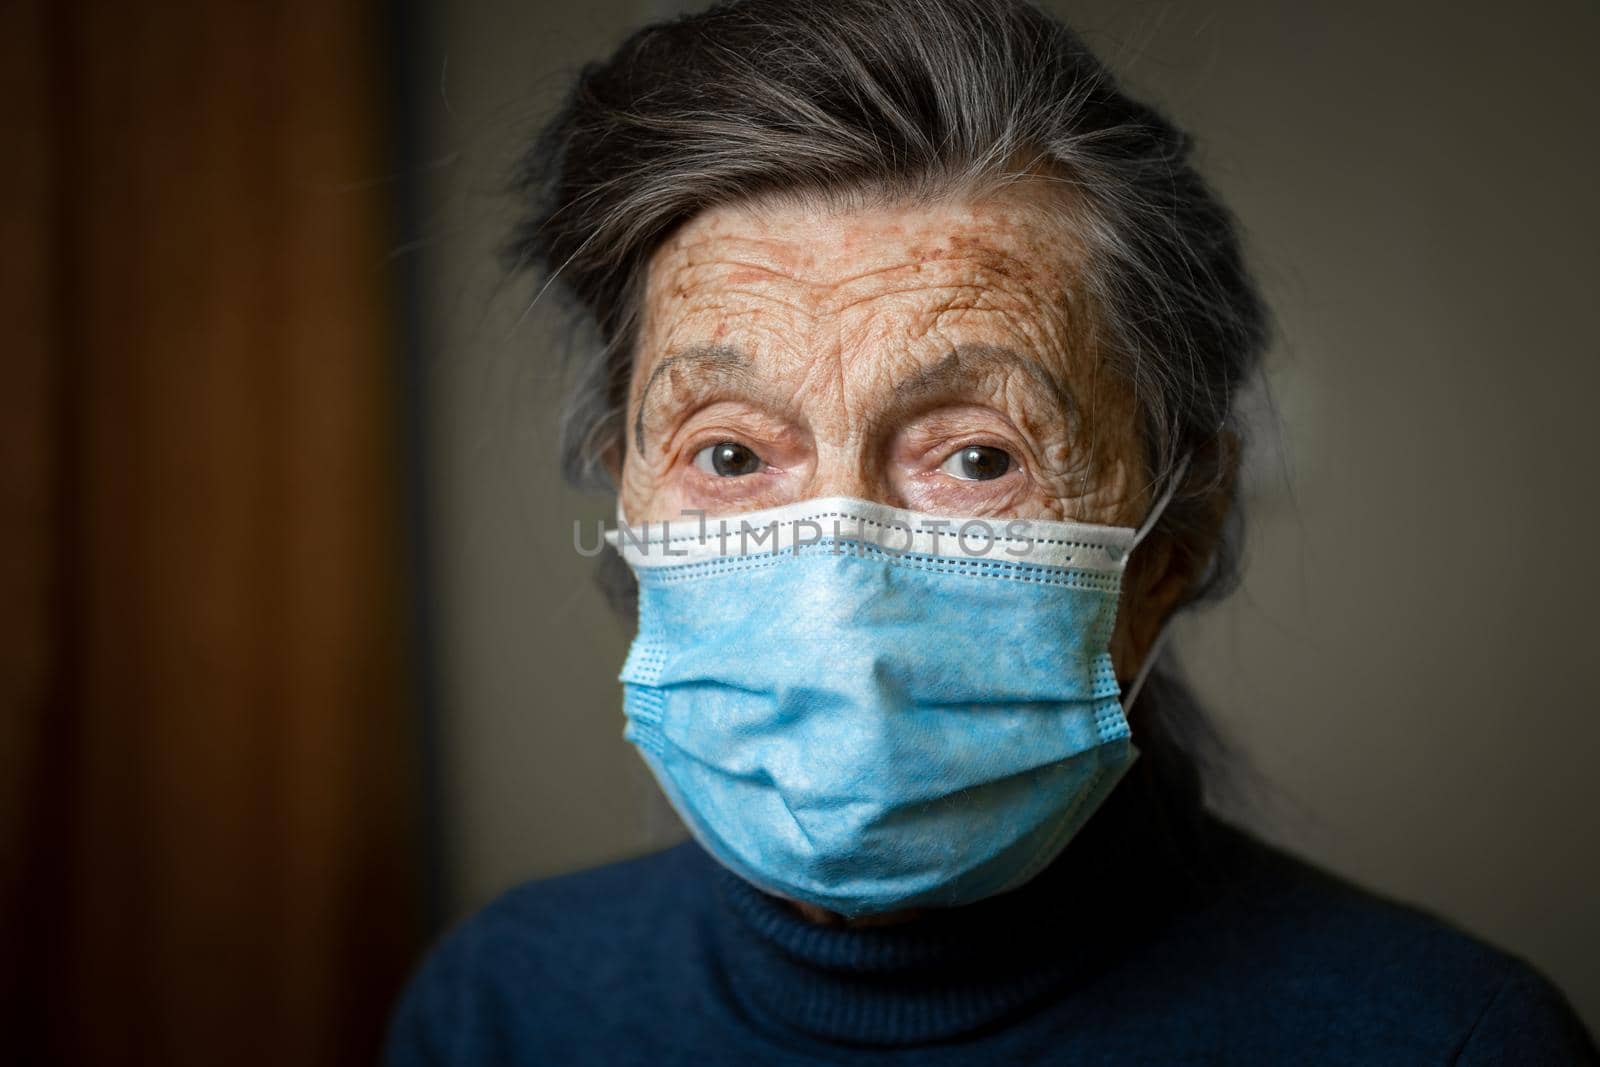 Wise look of old woman with medical mask on face encourages you to keep your distance and use protective equipment, health safety during an covid 19. Portrait of senior looking at camera, elderly care